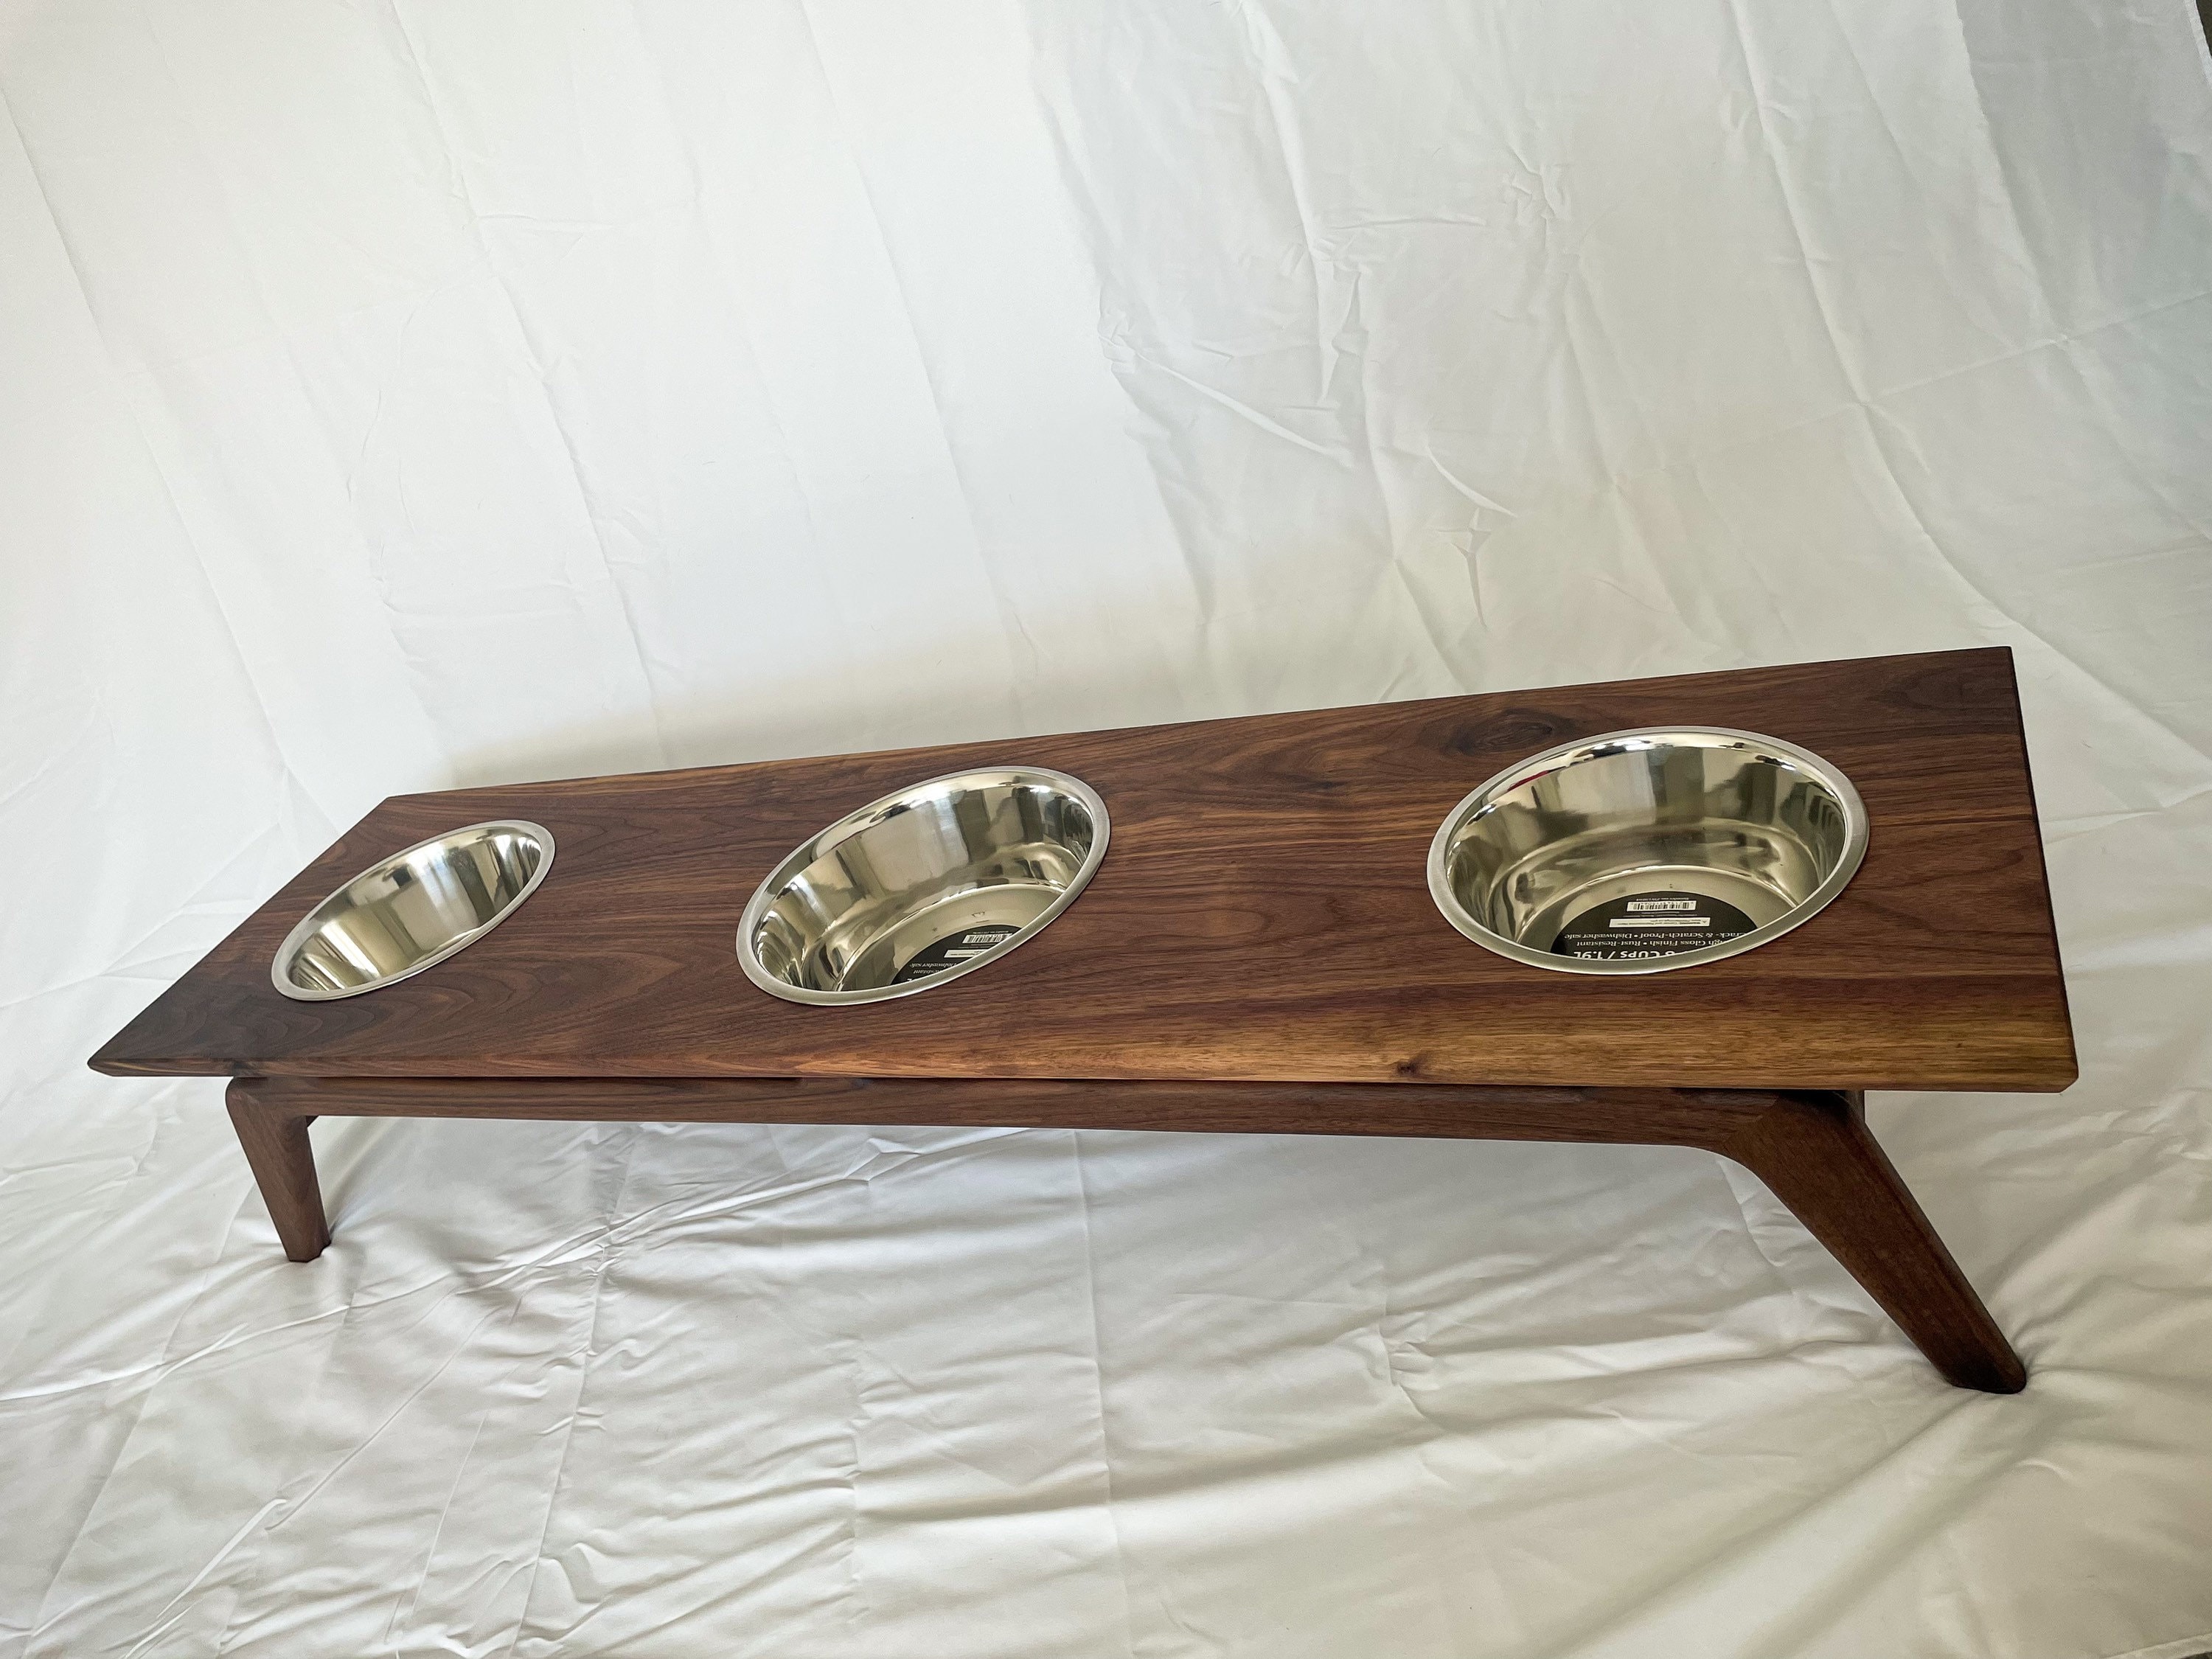 Raised Dog Bowl Stand With Two Bowls in Walnut Finish, Wooden